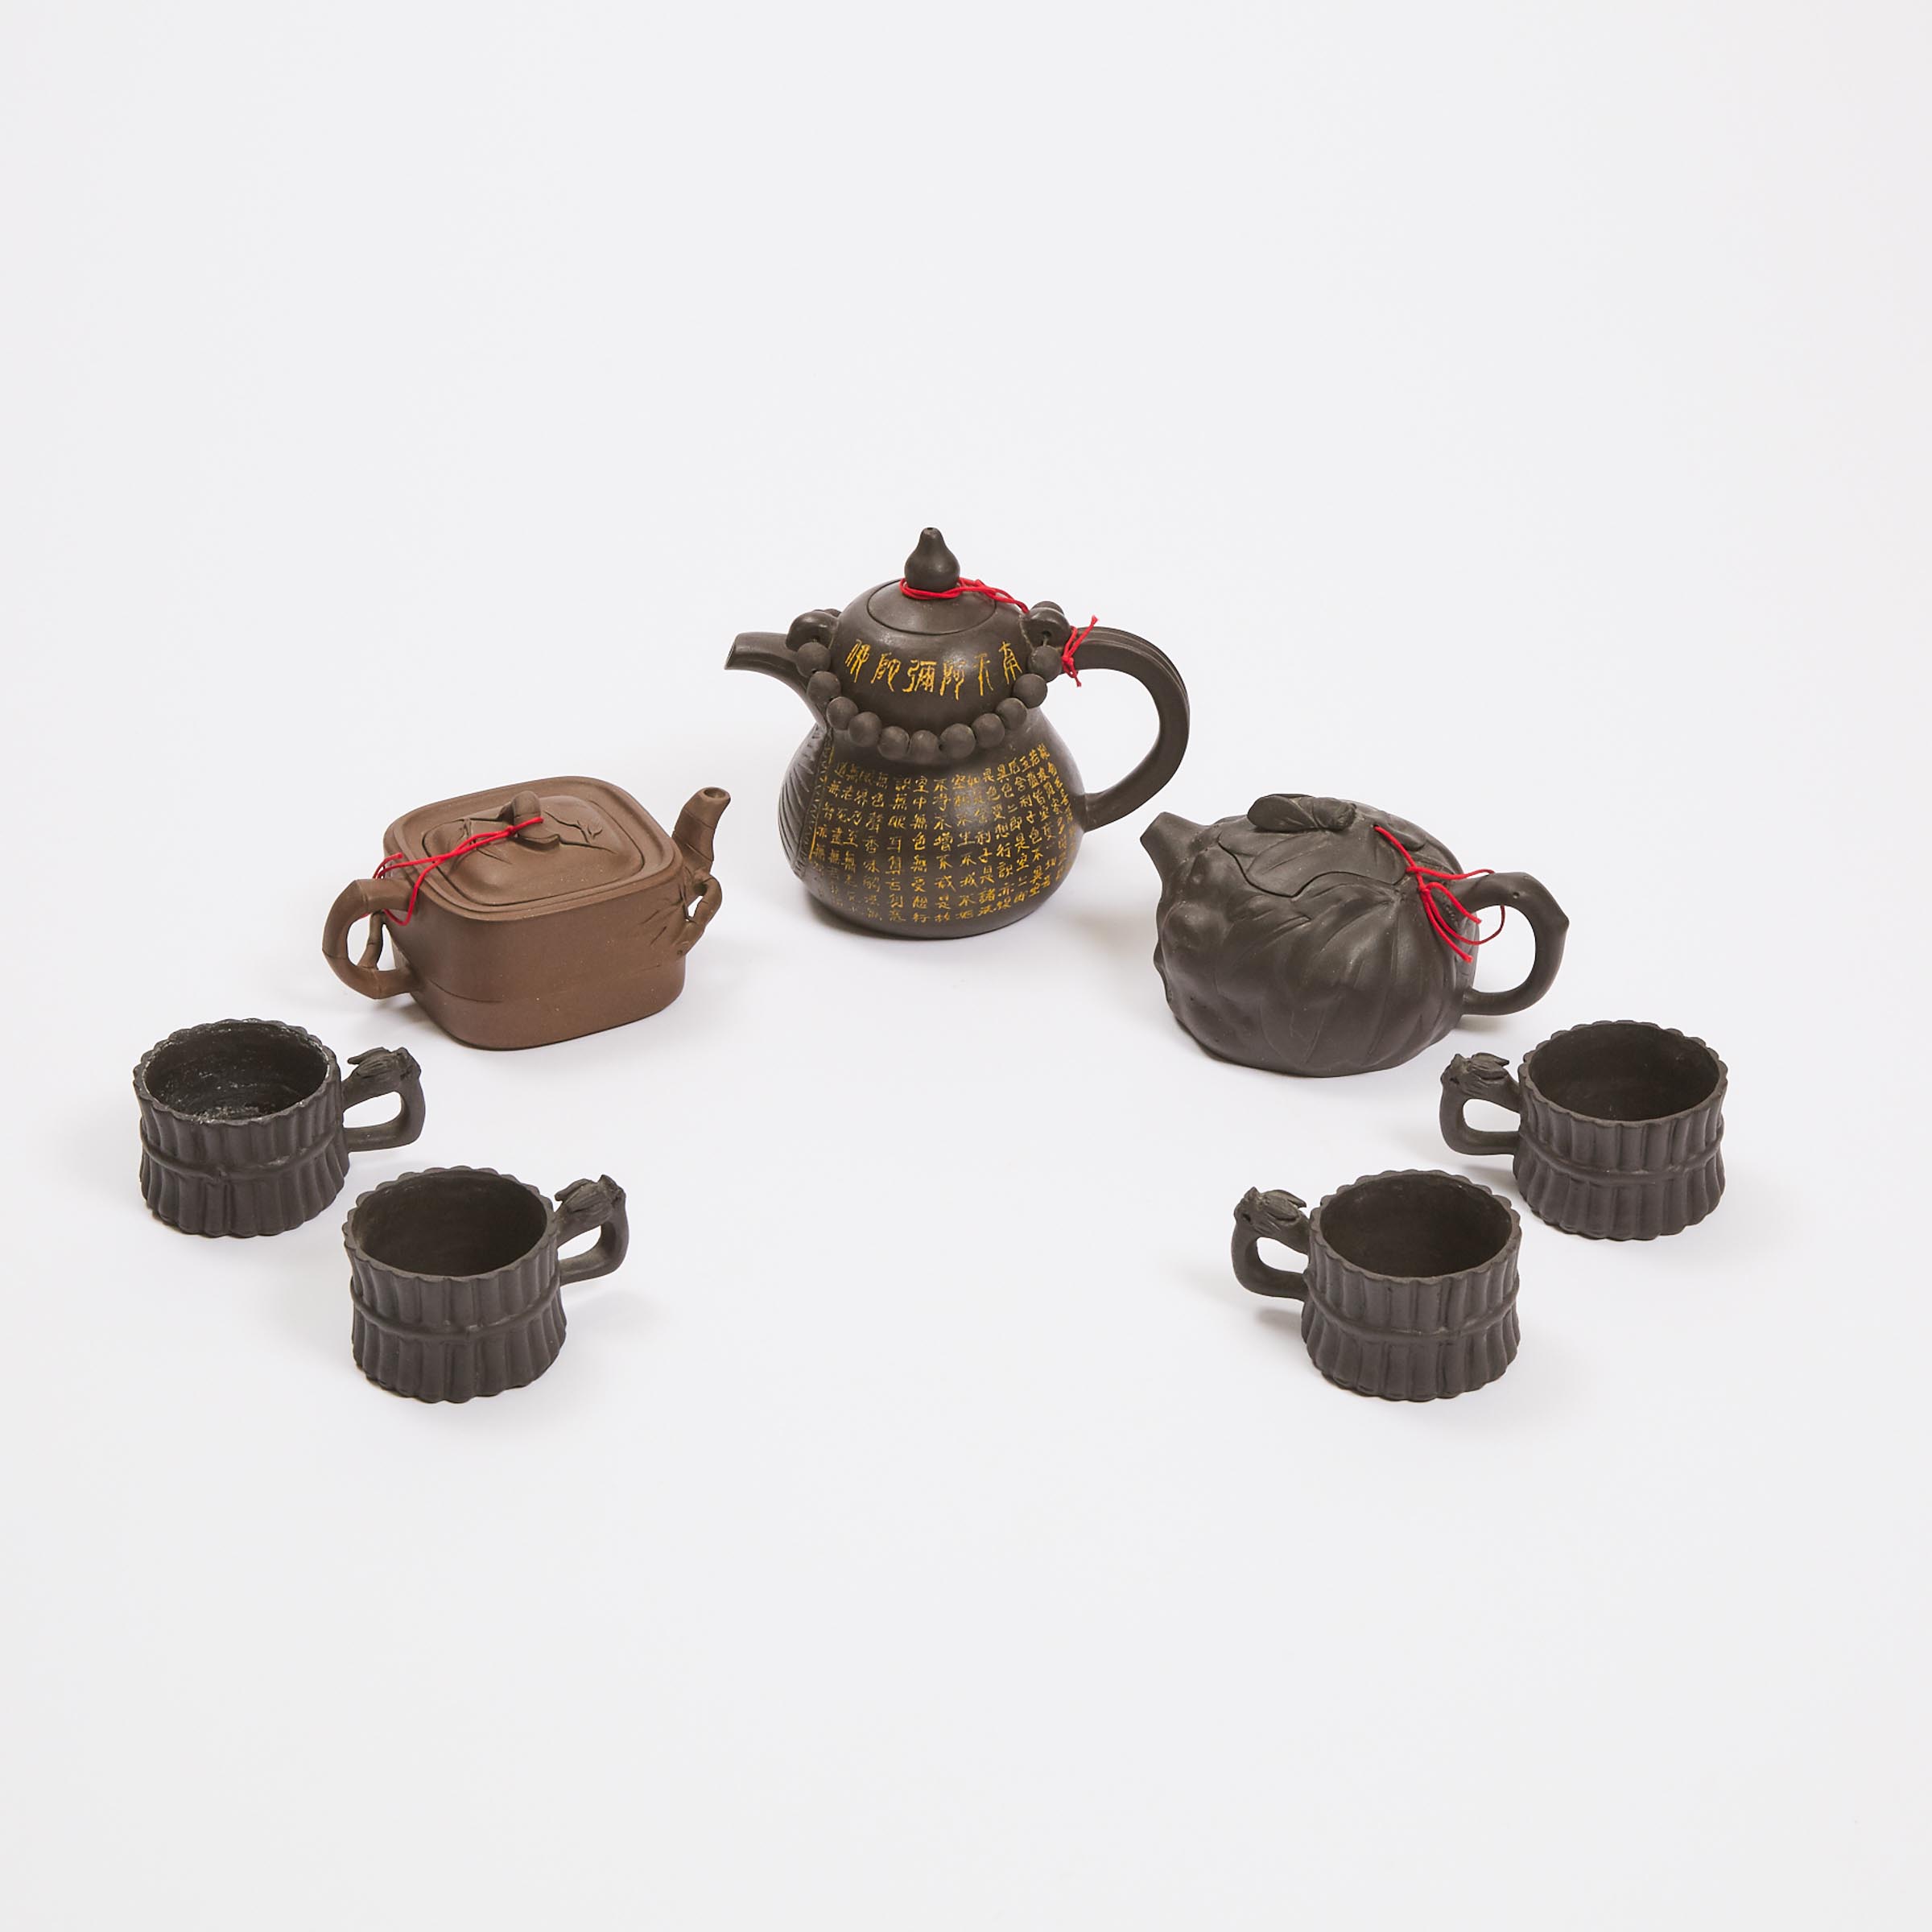 A Group of Three Zisha Teapots, Together With Four Tea Cups